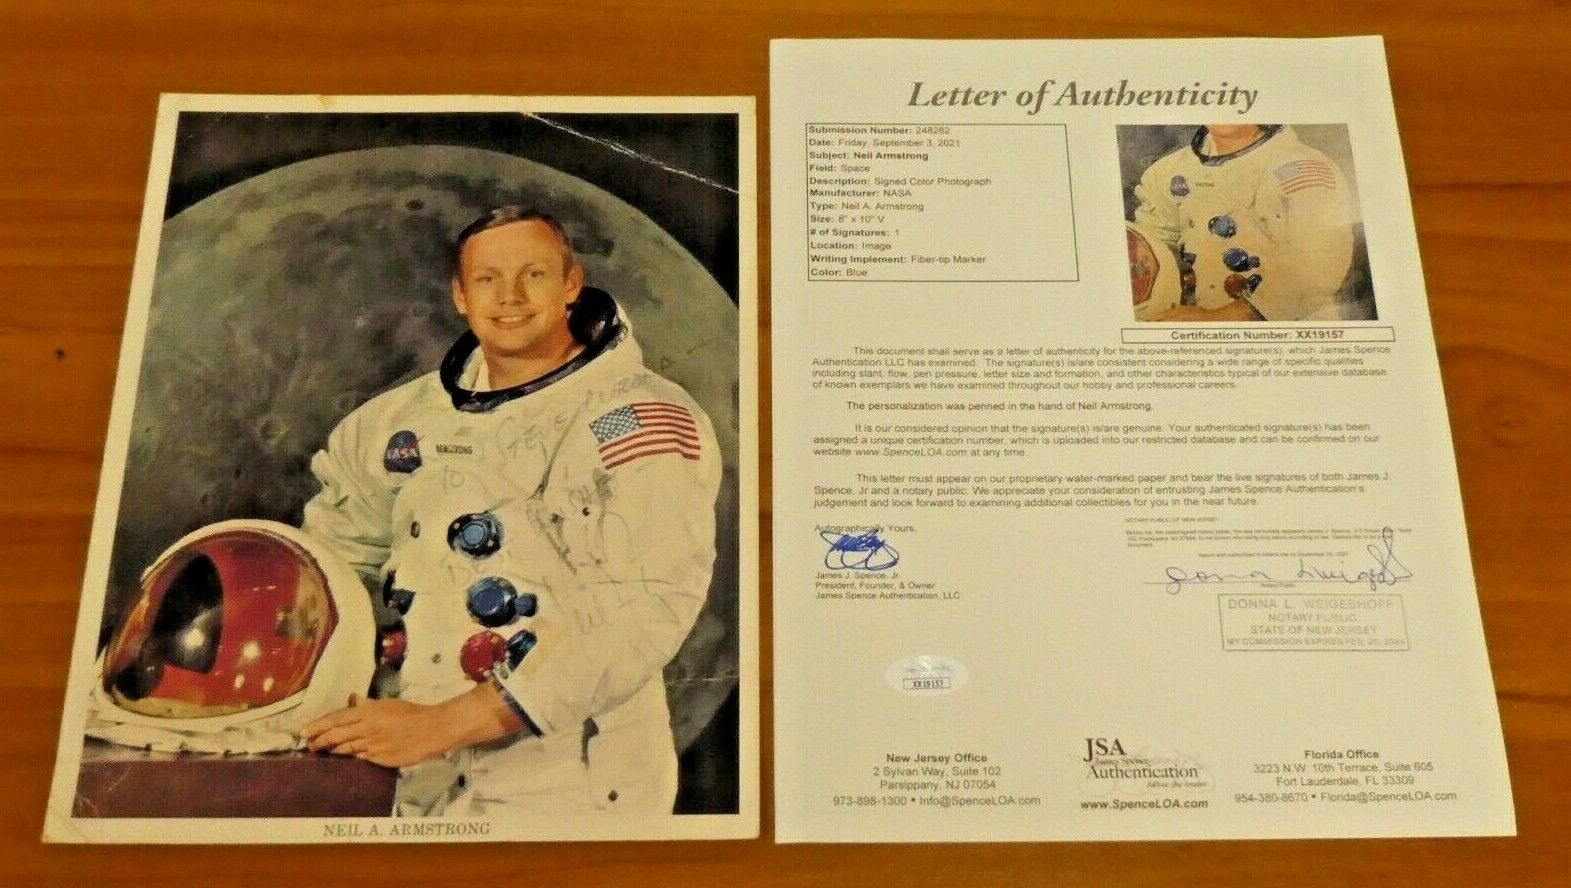 Neil Armstrong Autographed Signed Astronaut 8X10 Nasa Photo With Full JSA Letter